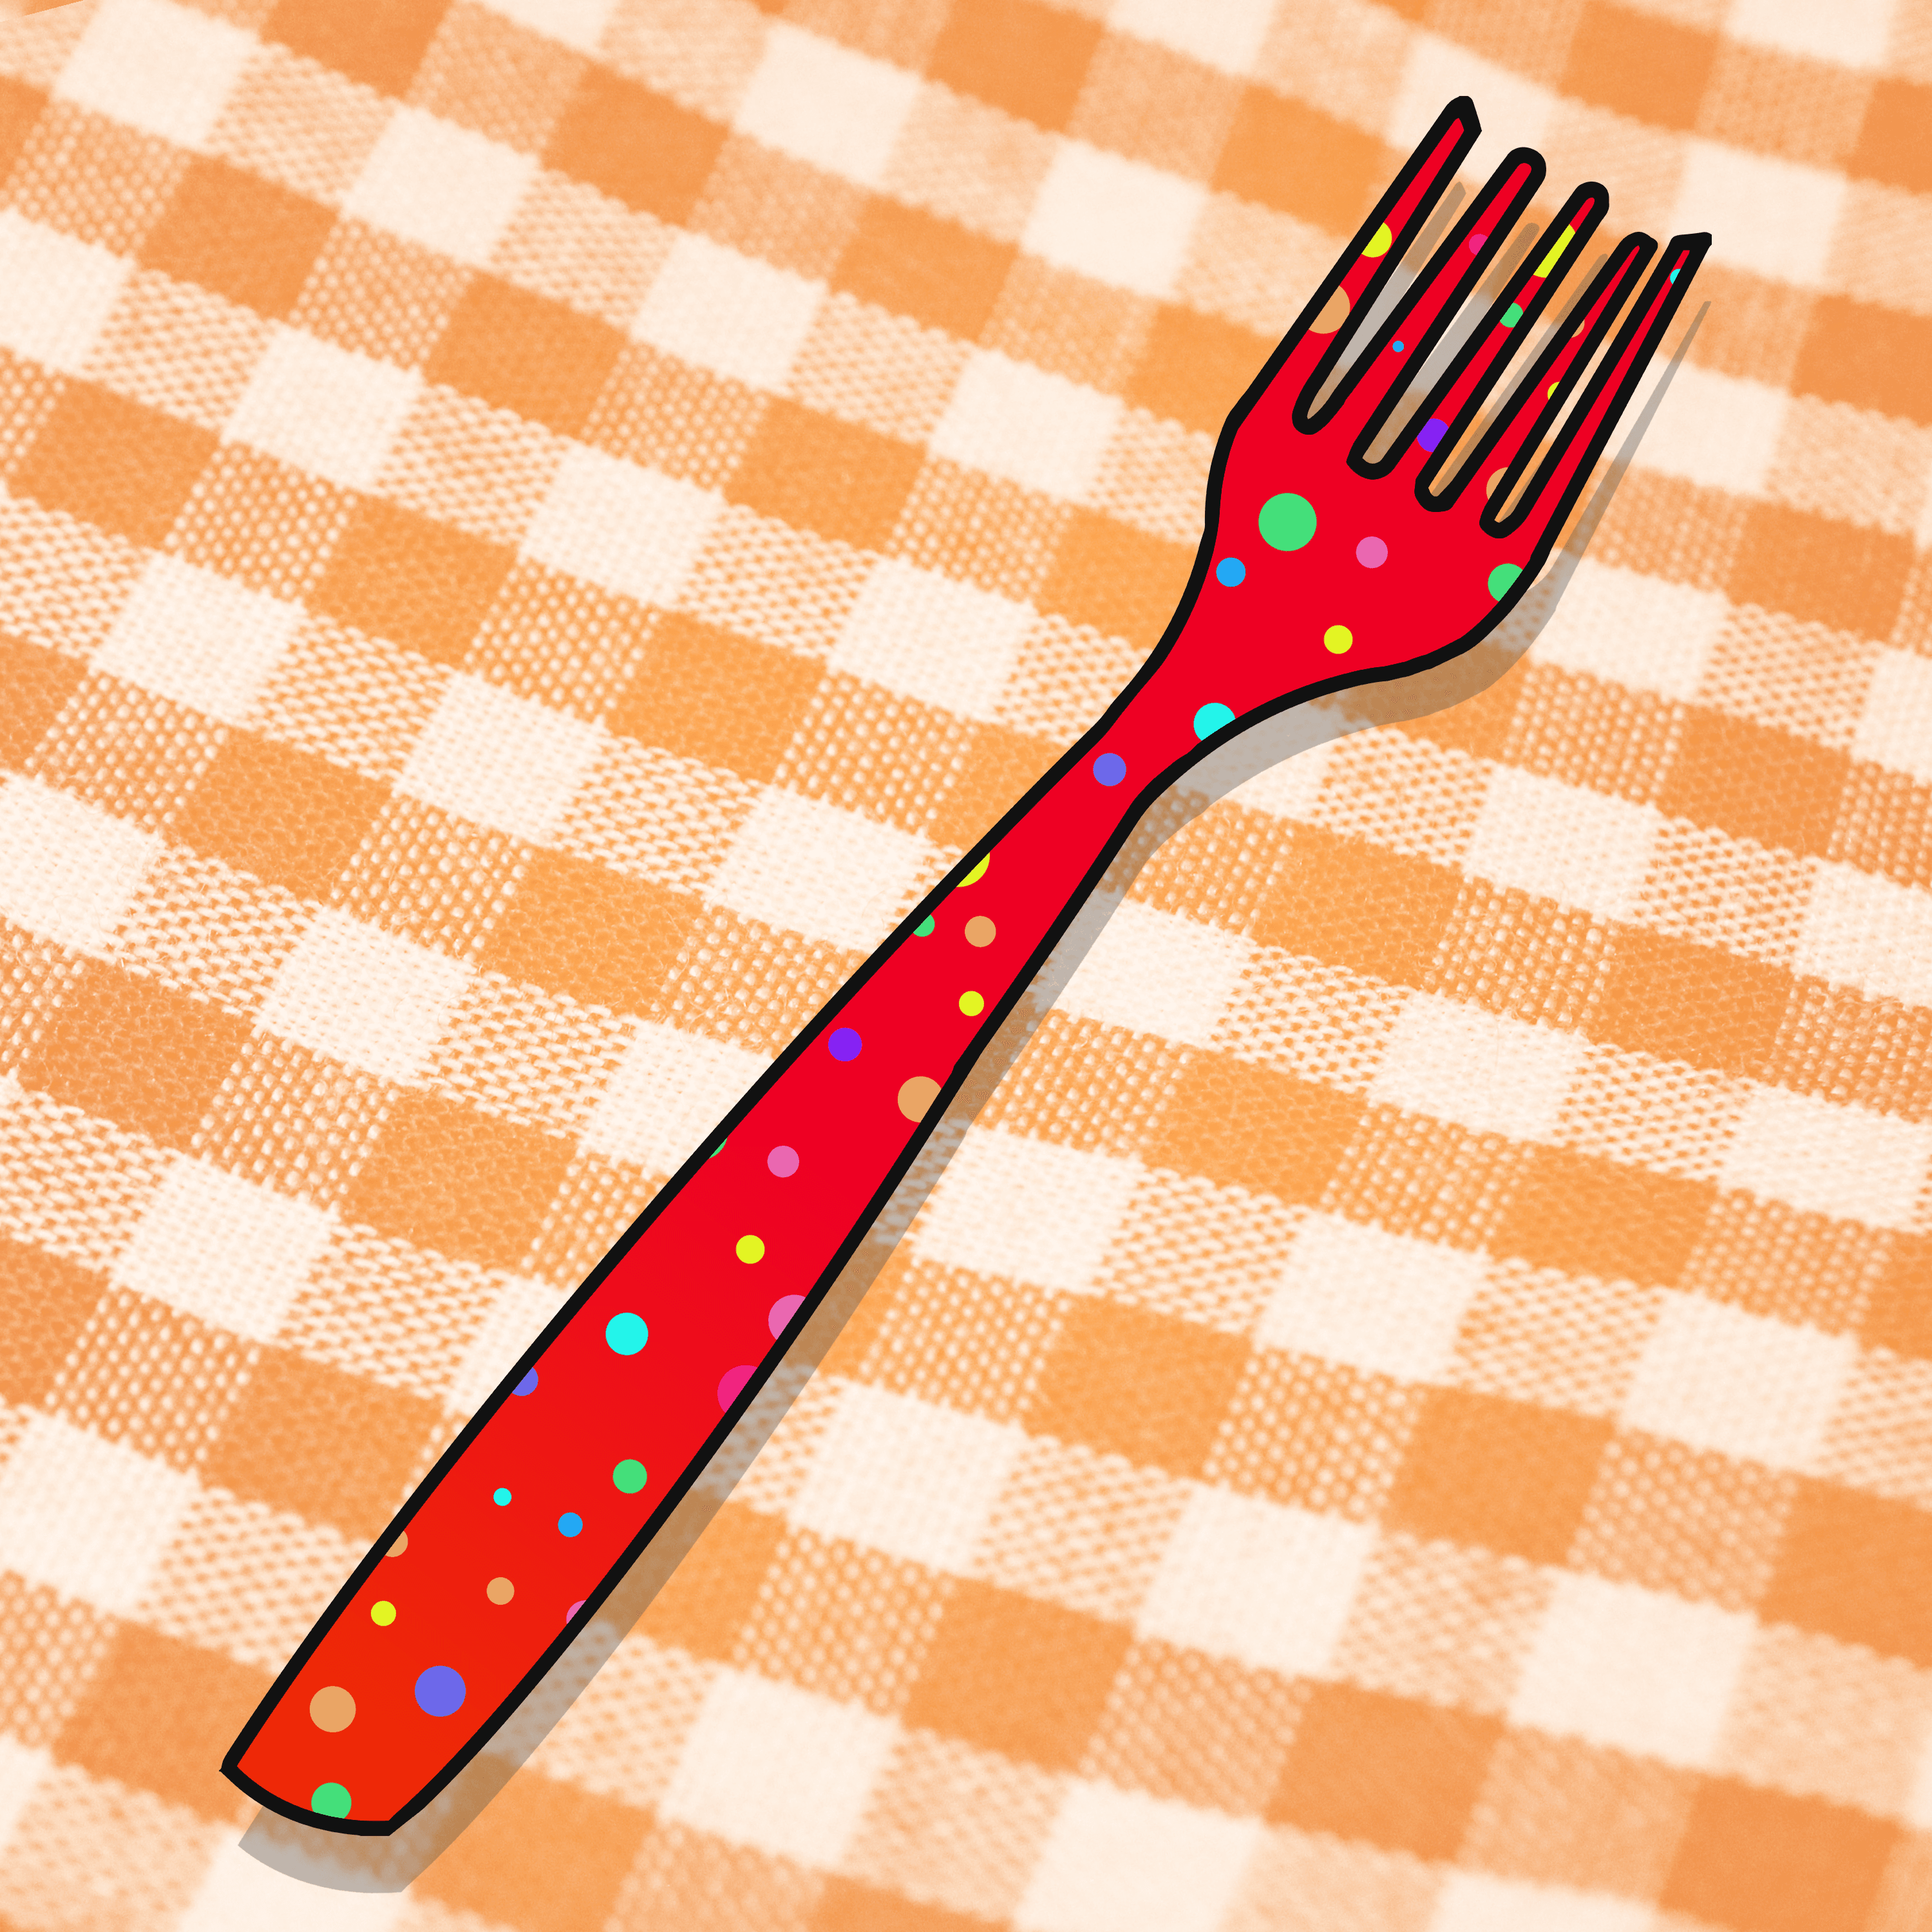 Laura's Favorite Fork (Non-Fungible Fork #2468)